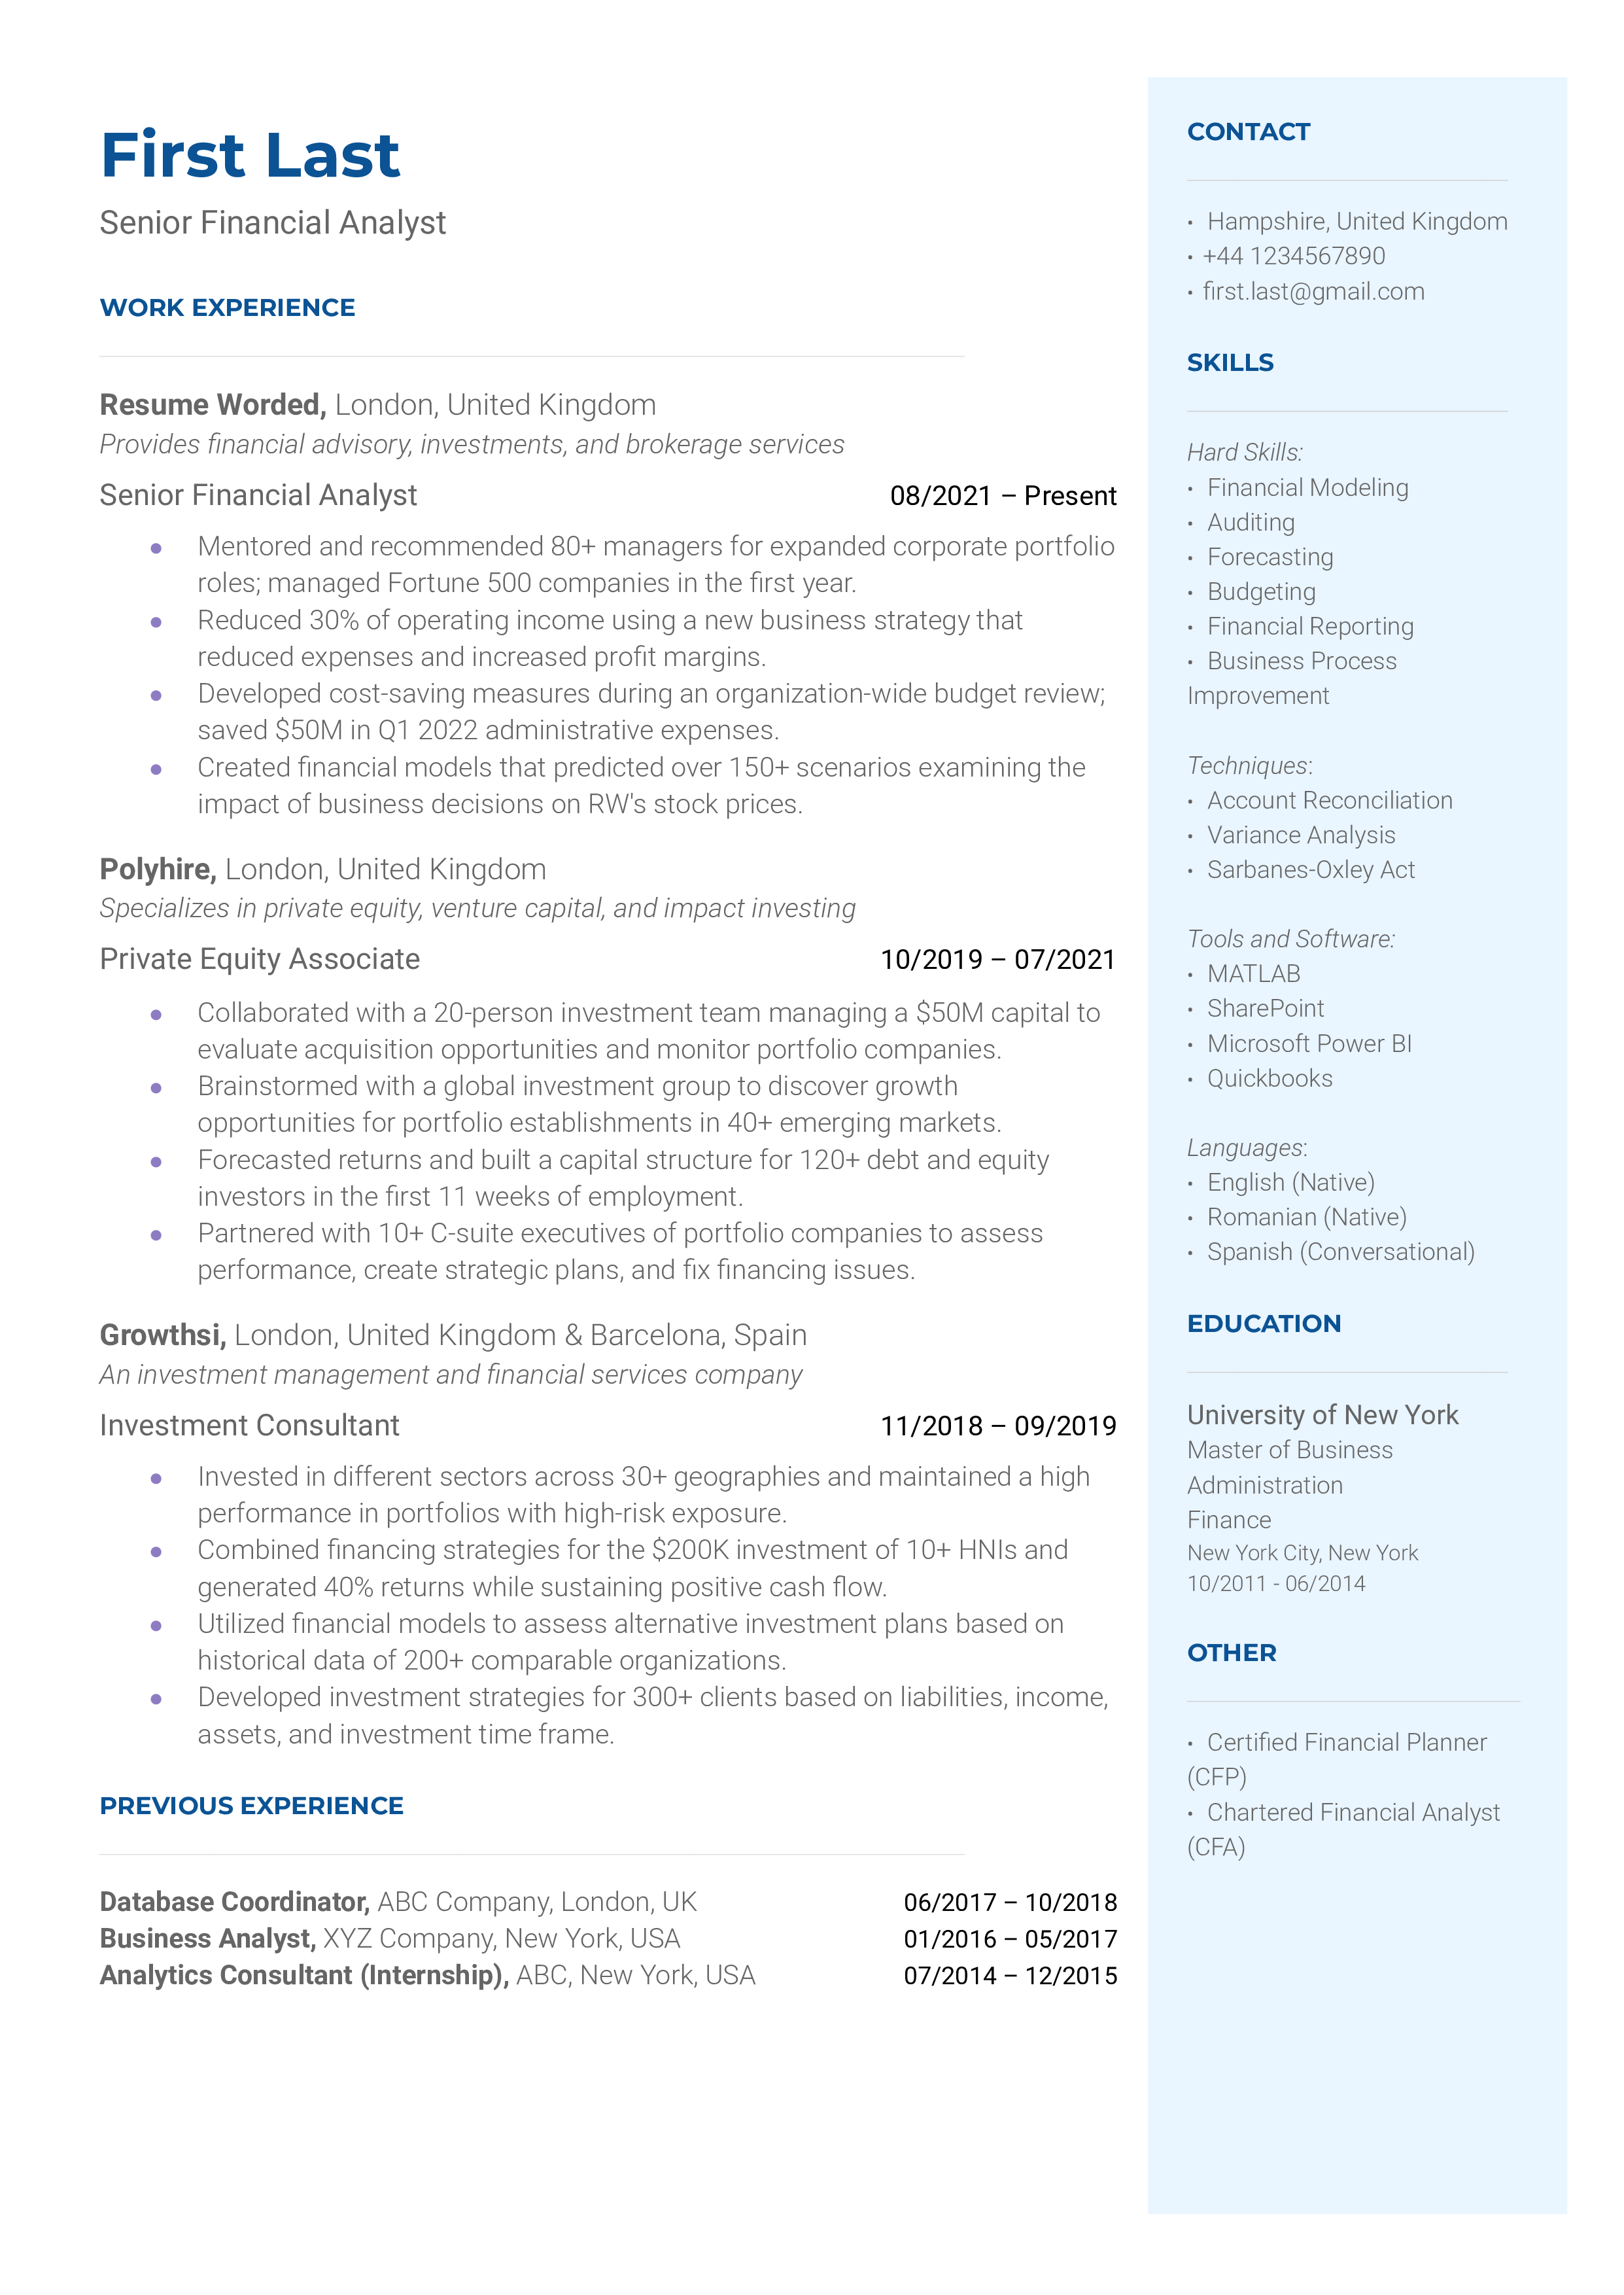 A resume for a senior financial analyst with a bachelor's degree in finance and prior experience as a lead financial consultant.